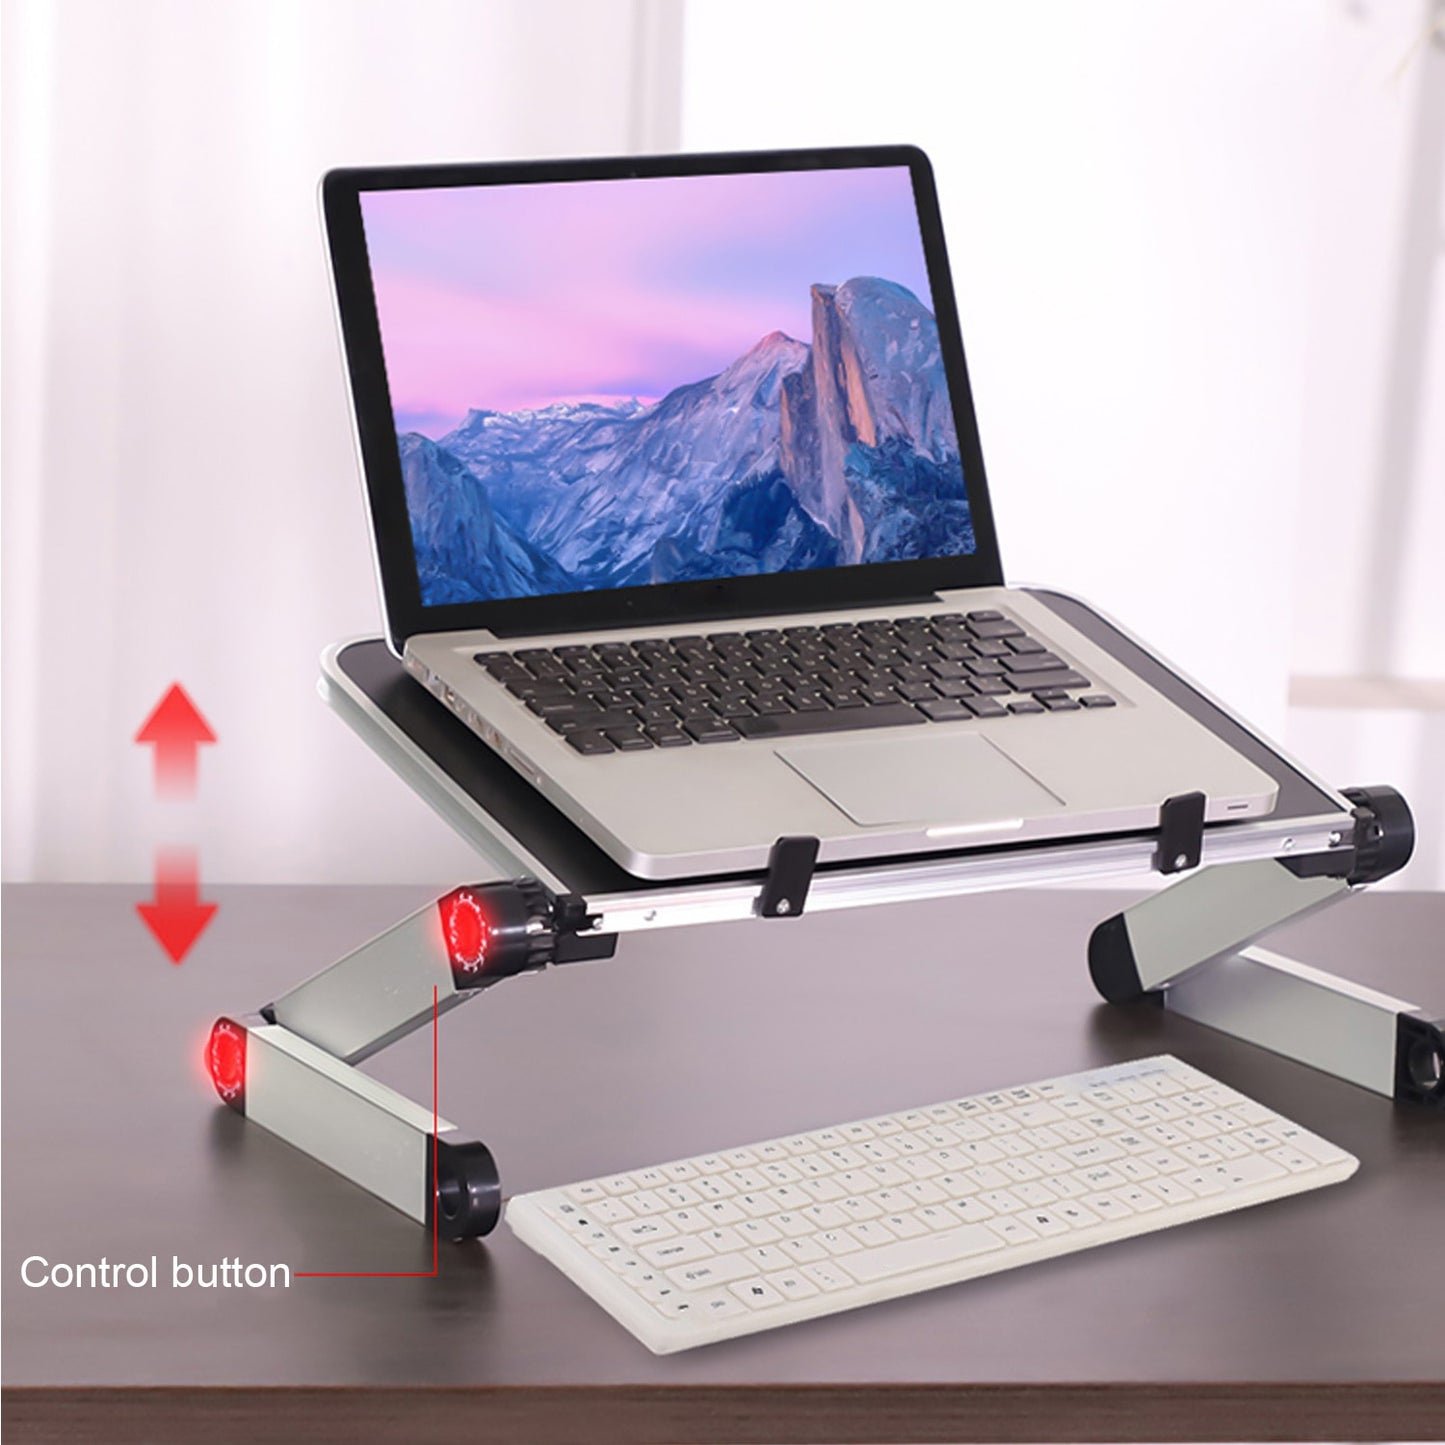 360 Degree Adjustable Foldable Laptop Support Desk Stand Holder Riser for Home Office School Indoor Outdoor Use Black The Good Home Store